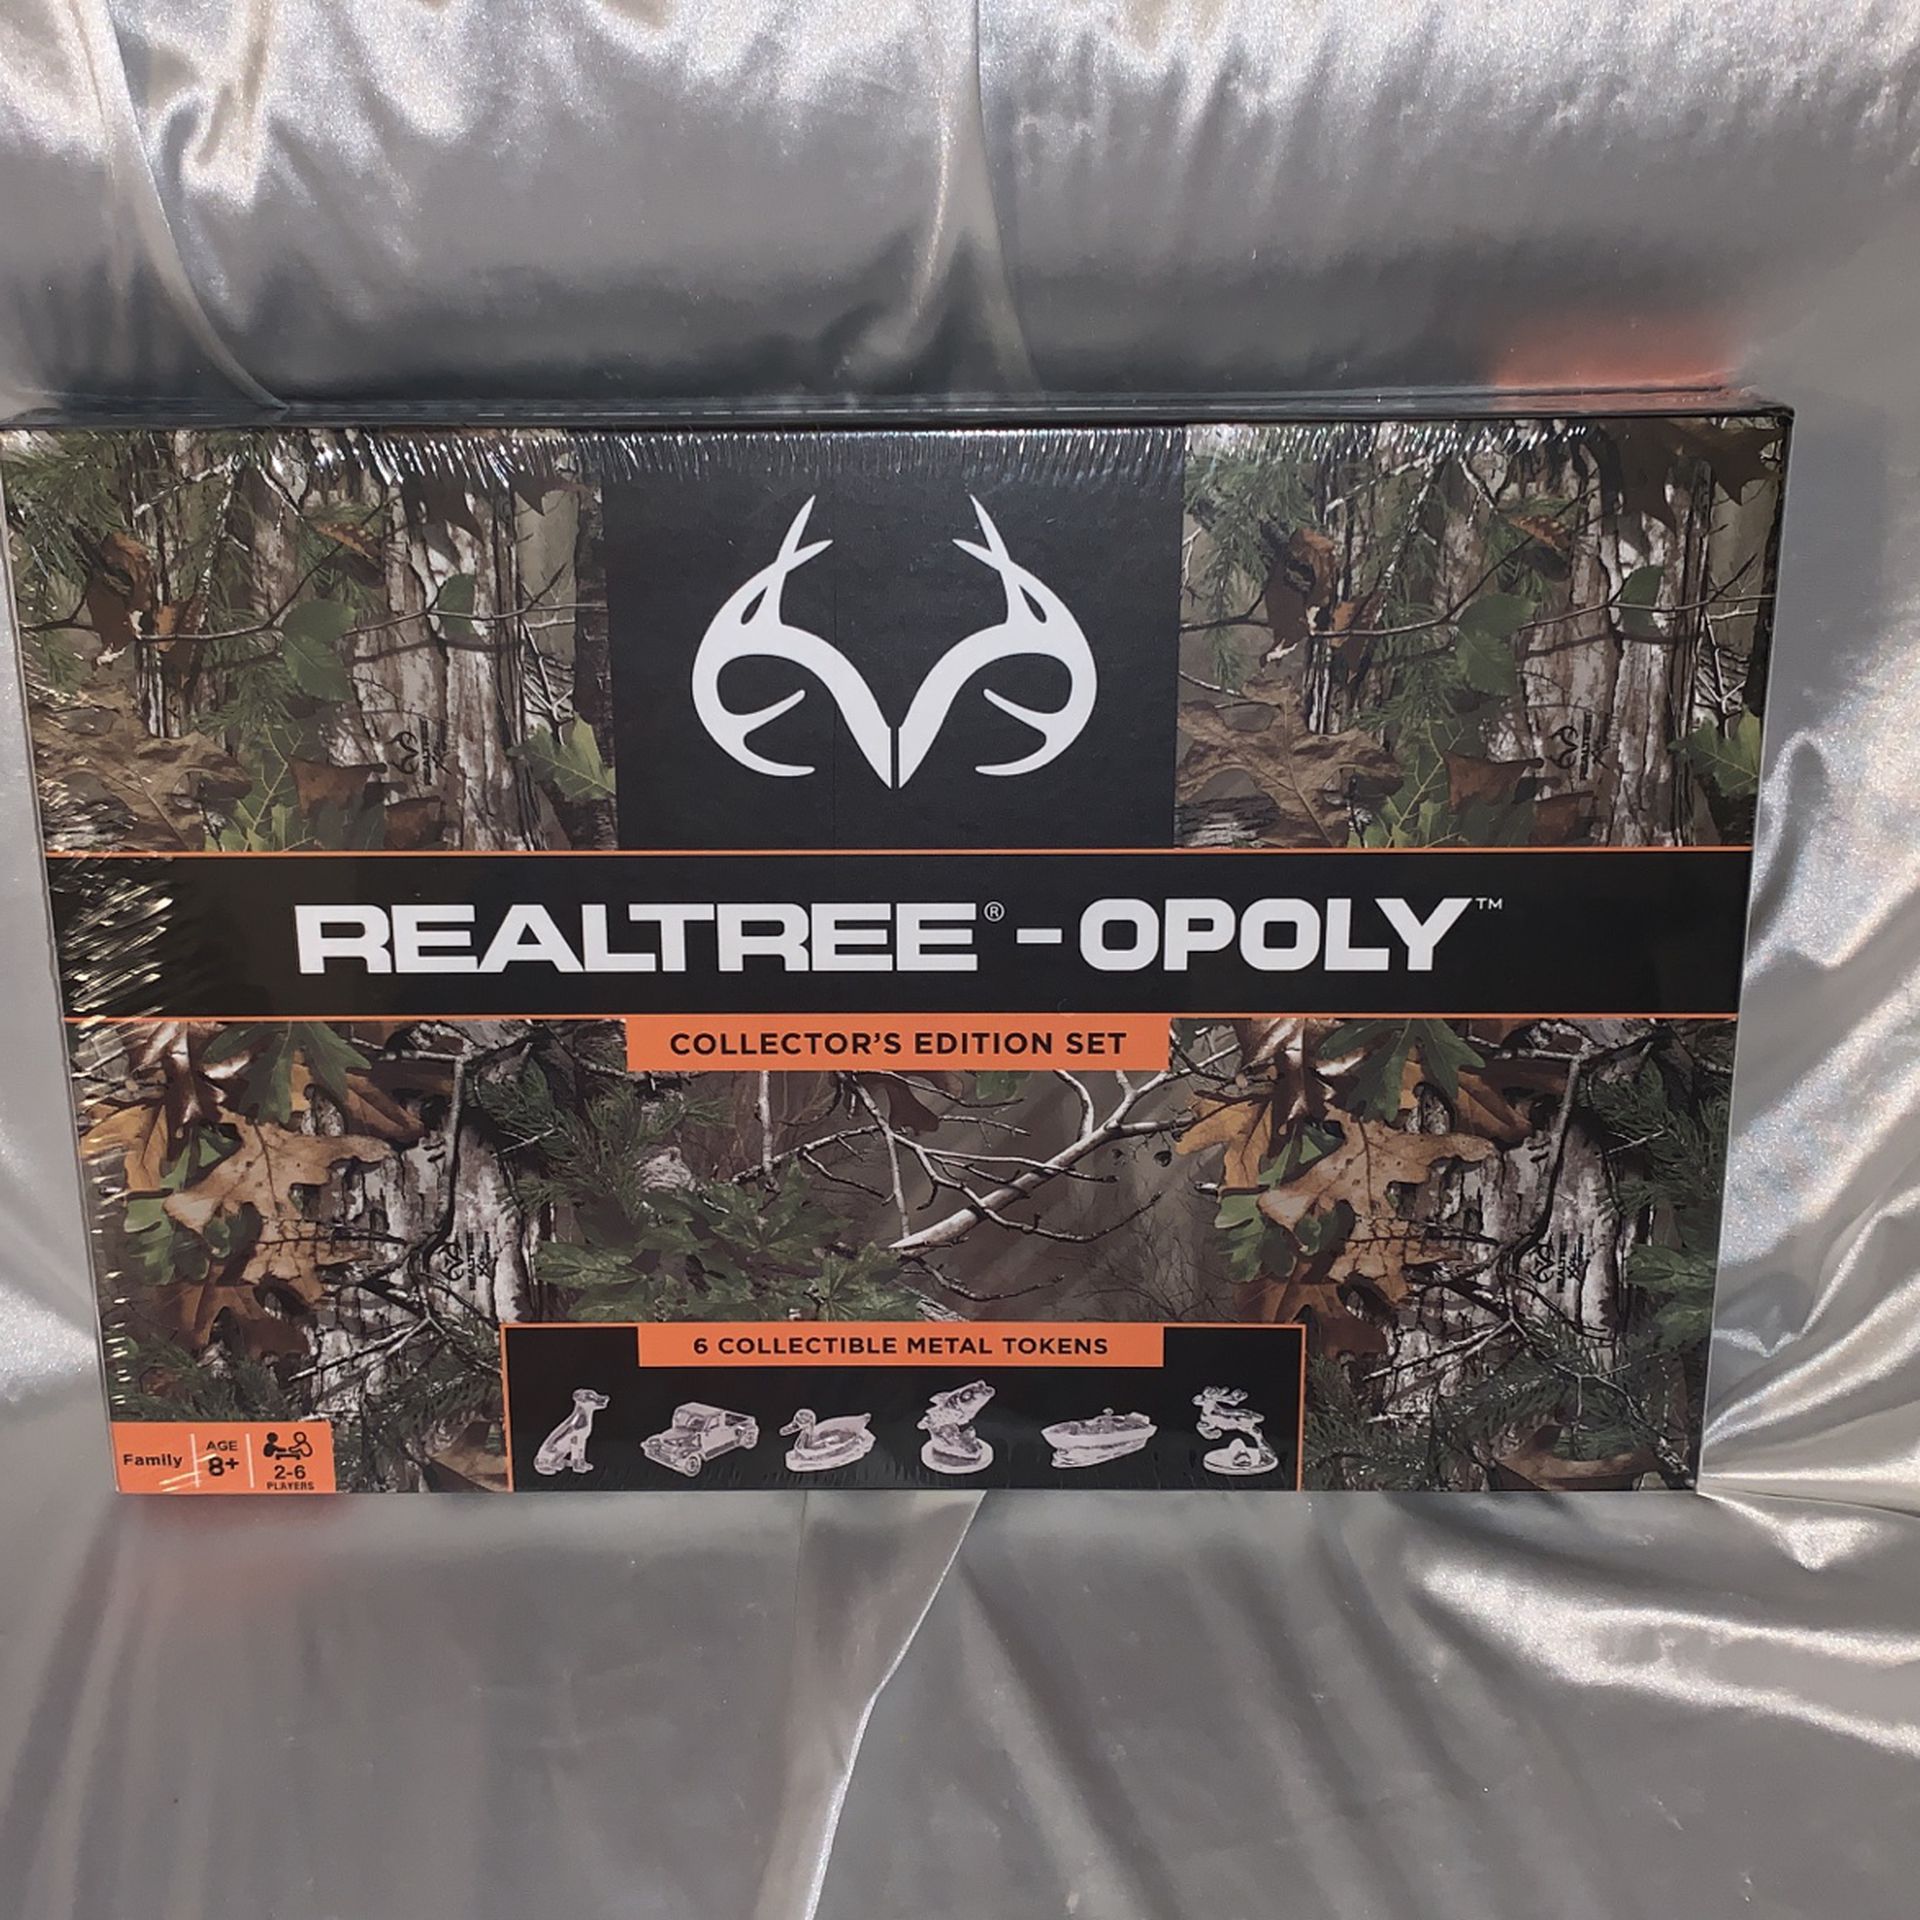 Realtree-opoly Hunting Board Game